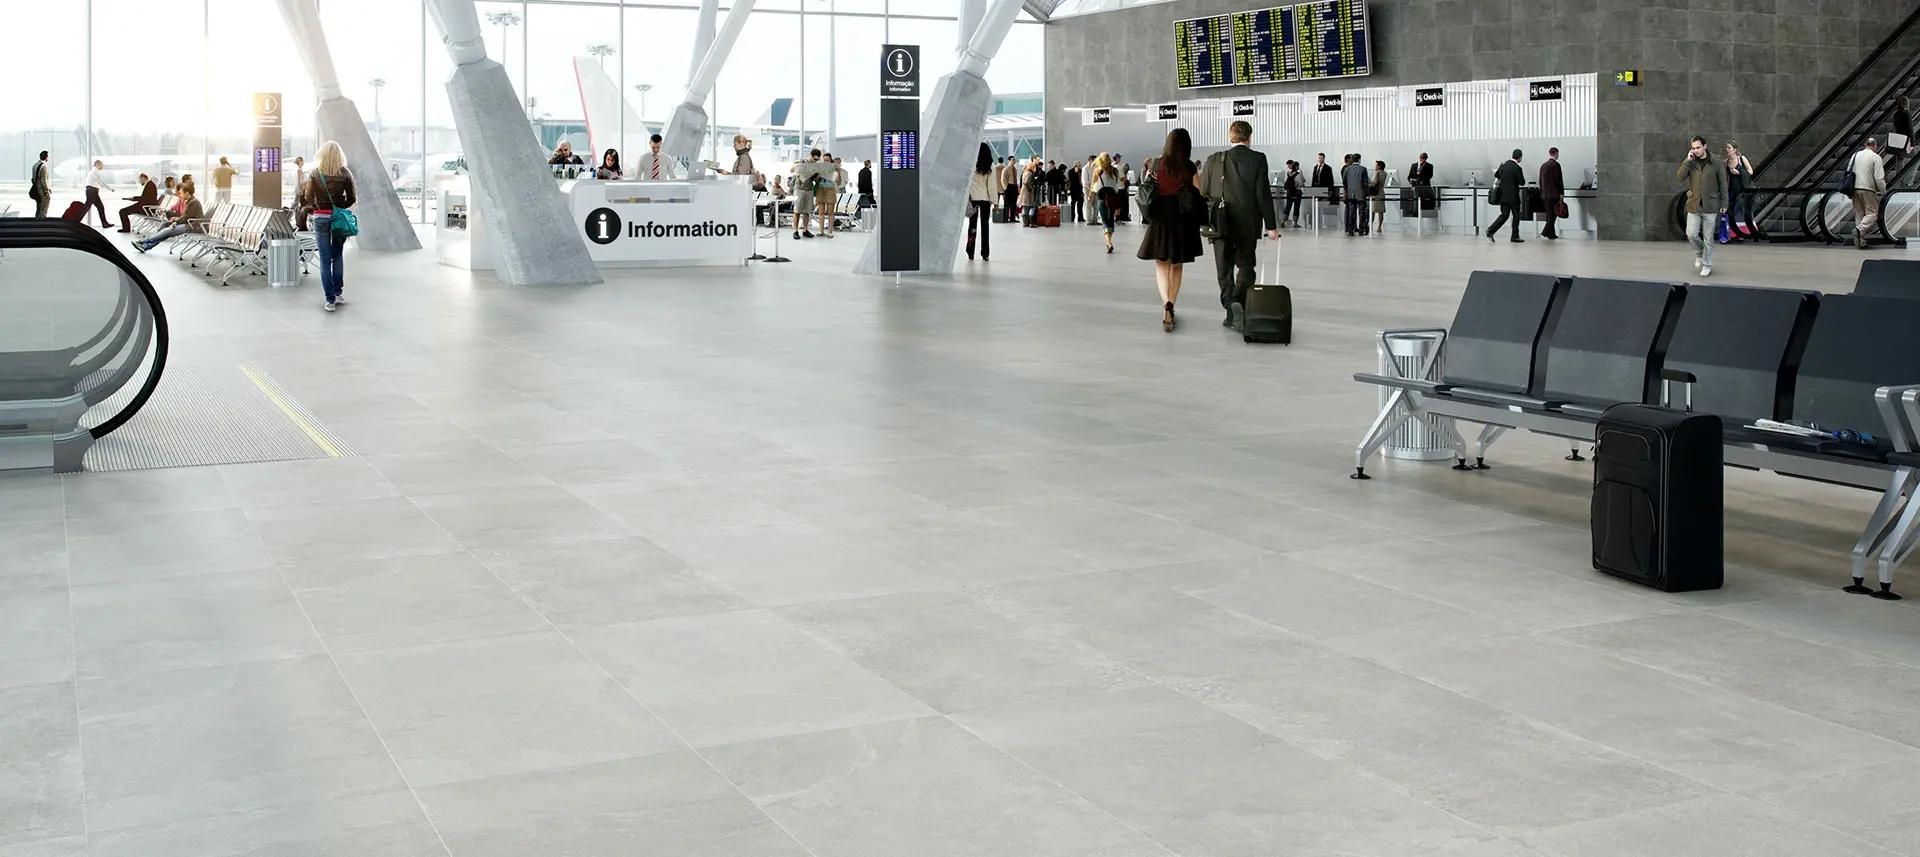 Public And Commercial Area Floor Tiles